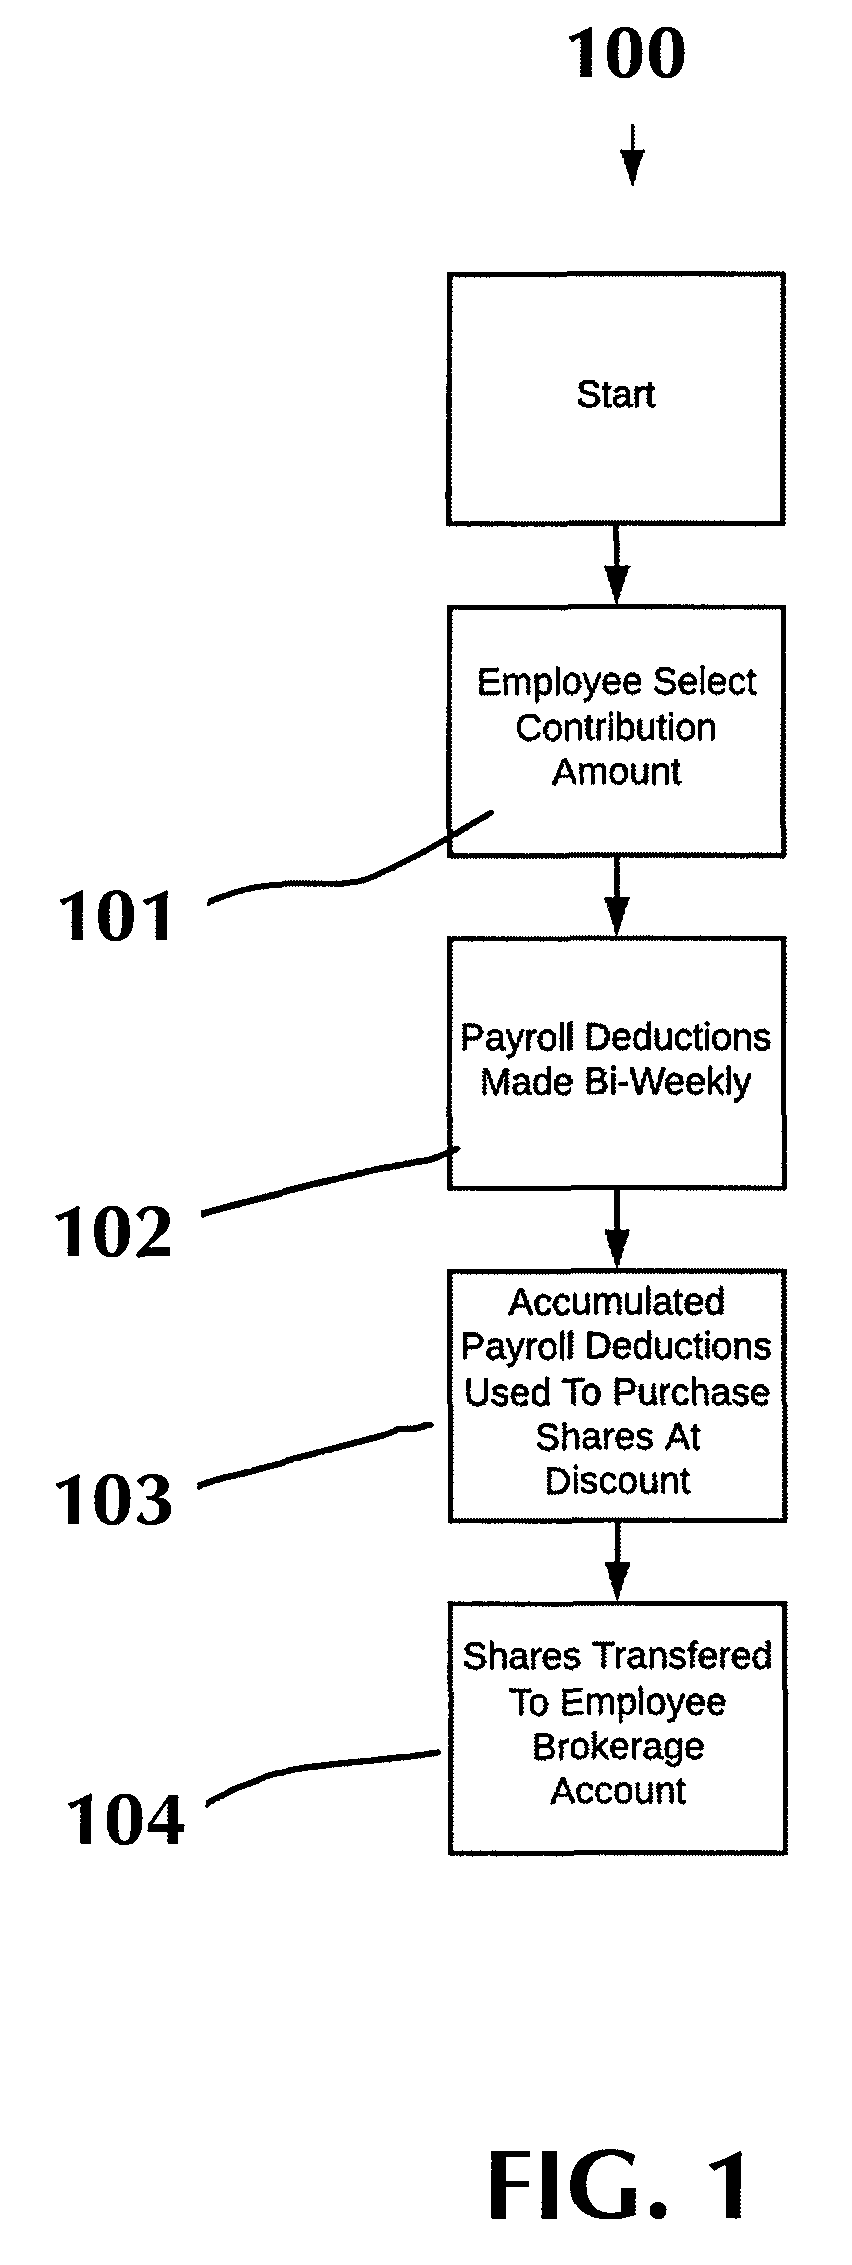 Methods and systems for maximizing share purchase under an employee stock purchase plan with limited payroll deductions